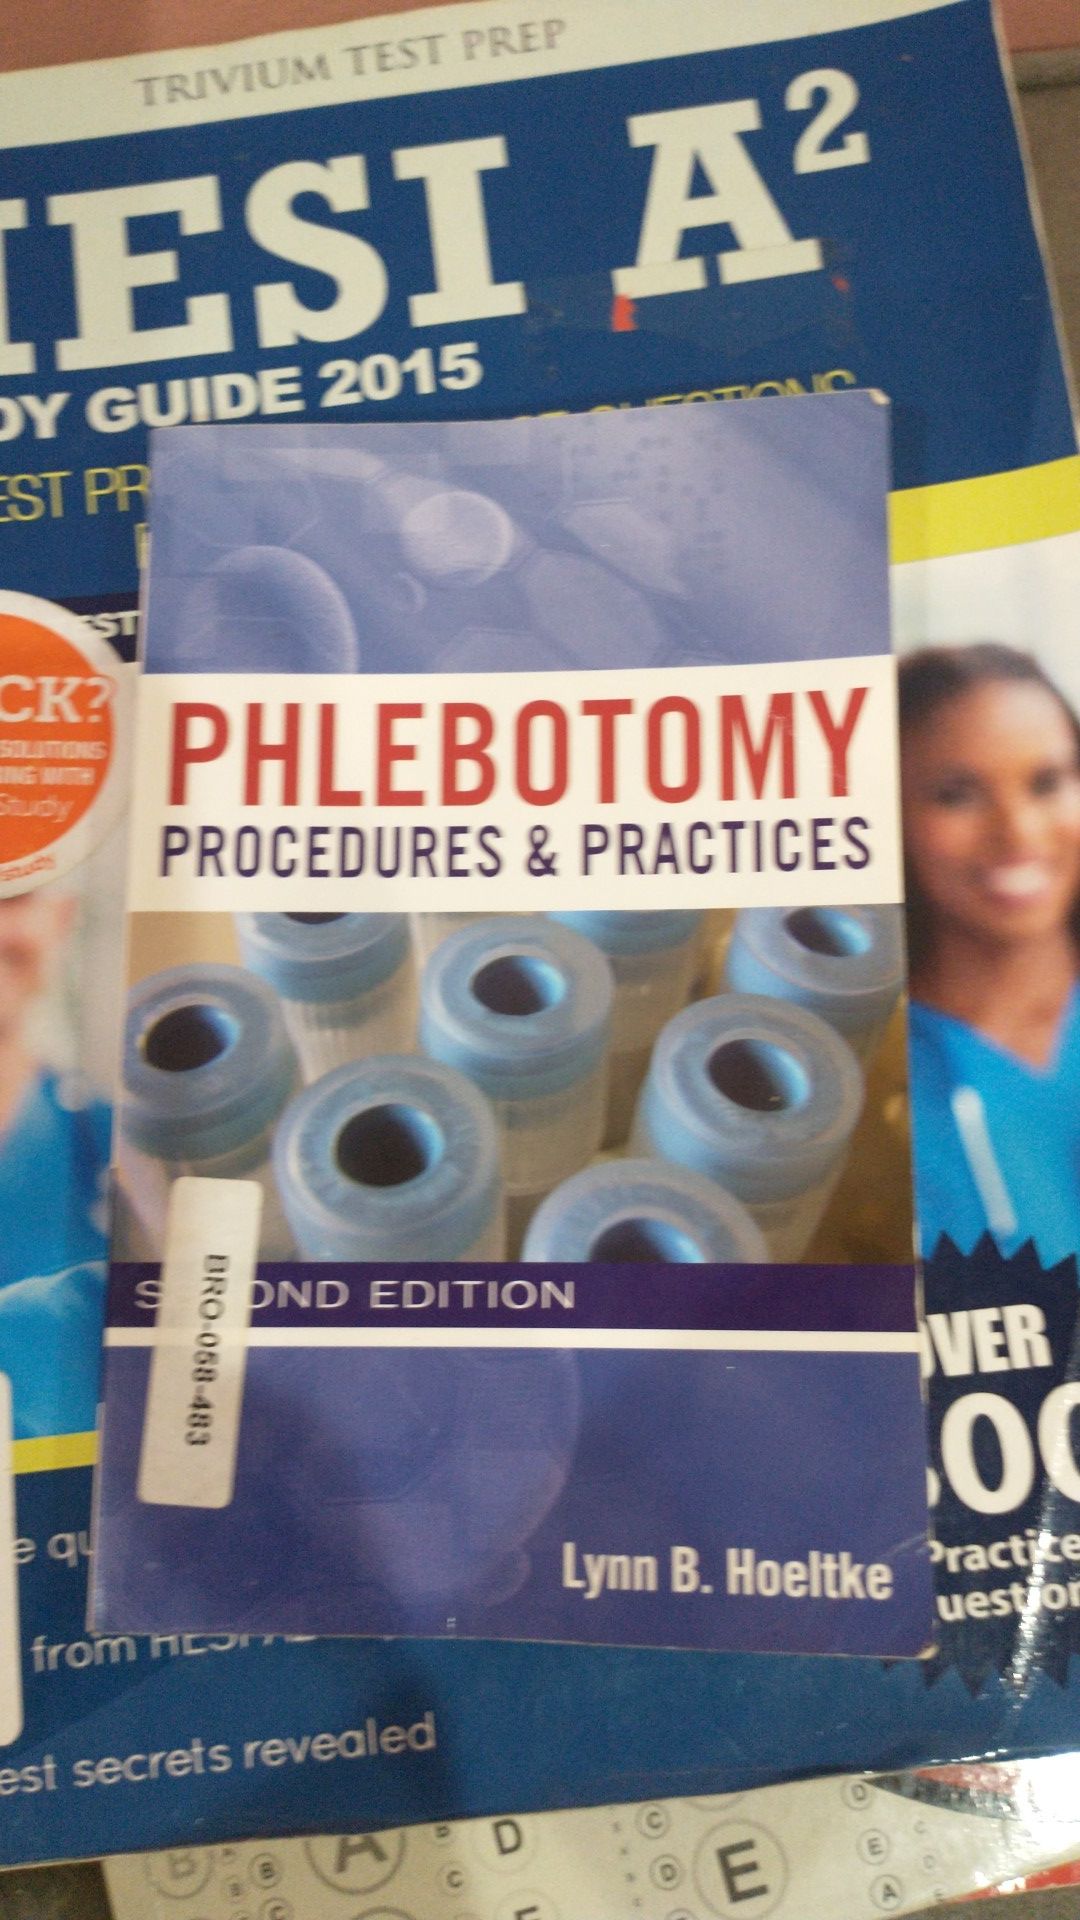 Phlebotomy procedures and practices 2nd ed